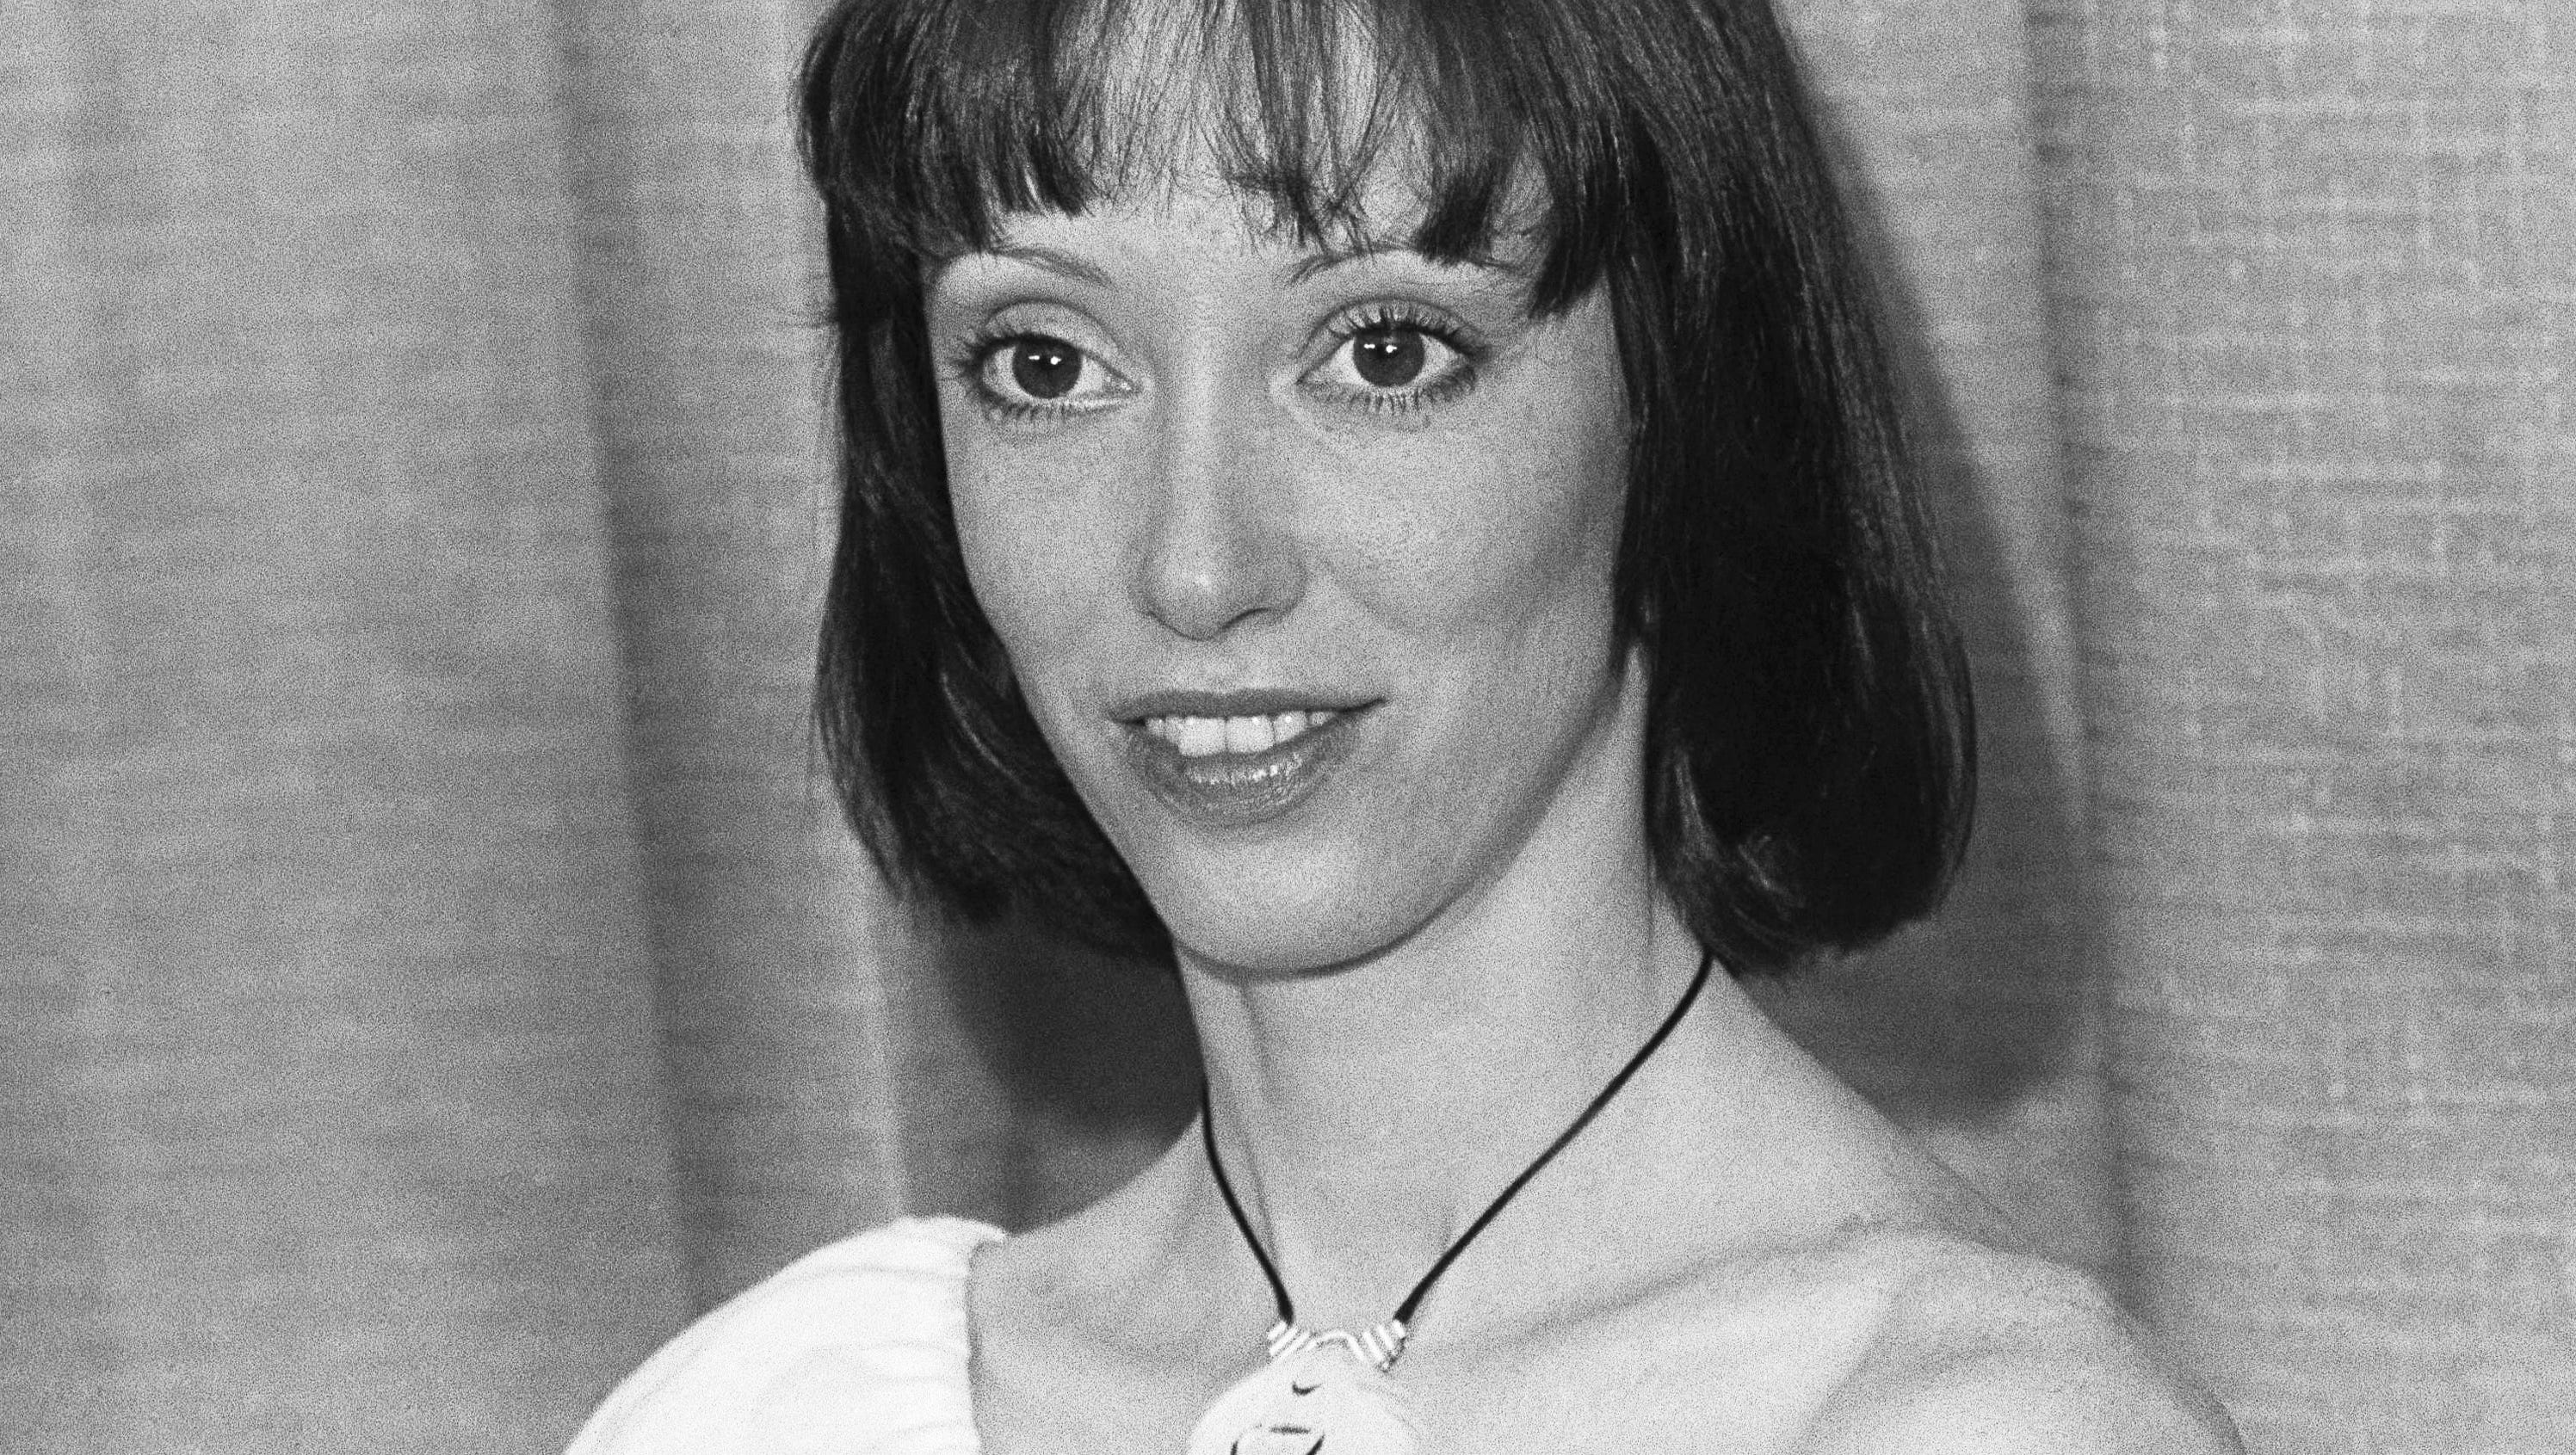 Dr Phil Interviews Shelley Duvall To Persuade Her To Get Psychiatric